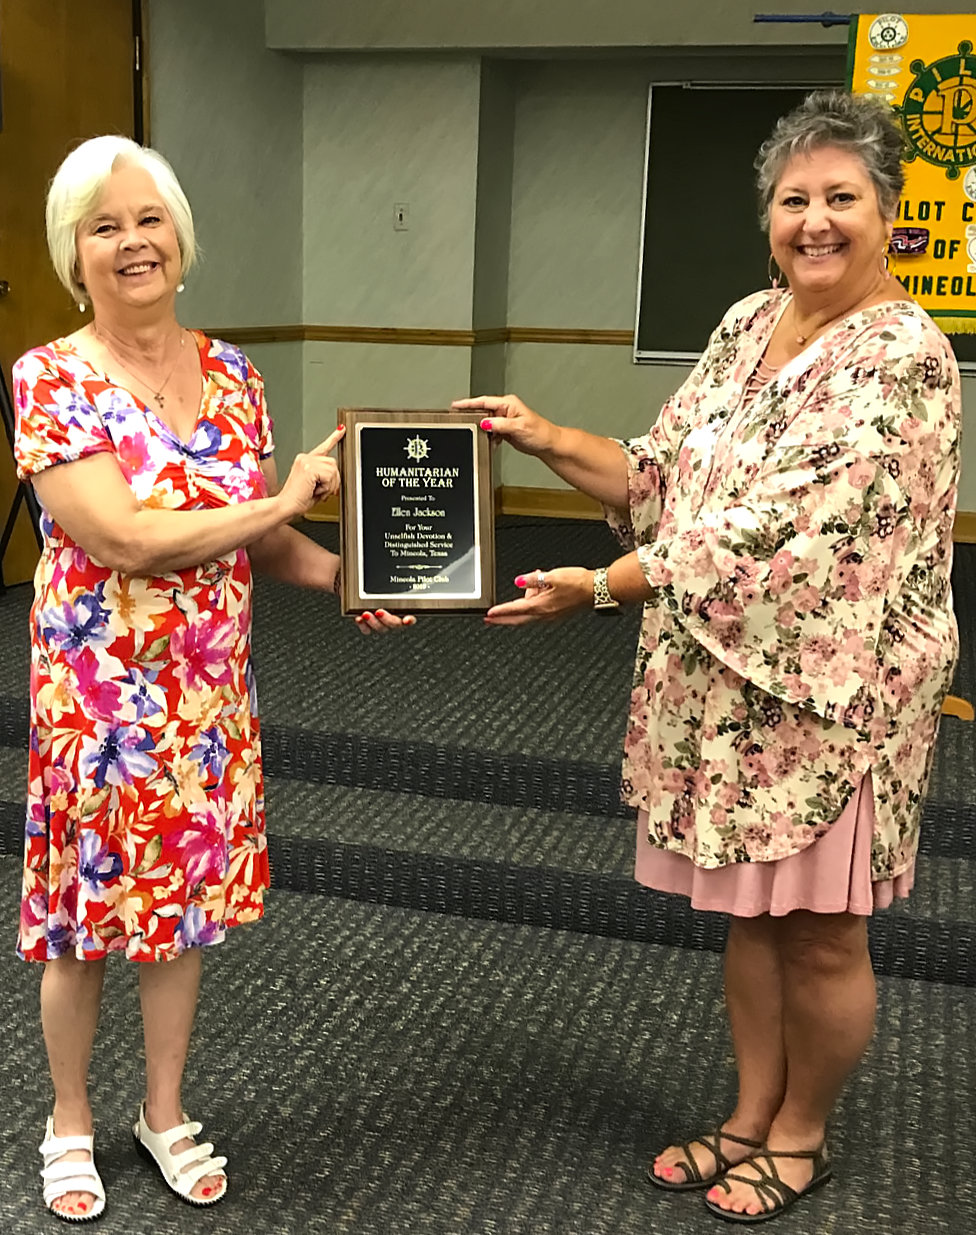 Ellen Jackson, left,  was named the humanitarian of the year by the Mineola Pilot Club. Club President Loraine Eppsa presented the award at the club’s annual banquet recently. It was to be presented at the annual chamber banquet in March, which had to be canceled.